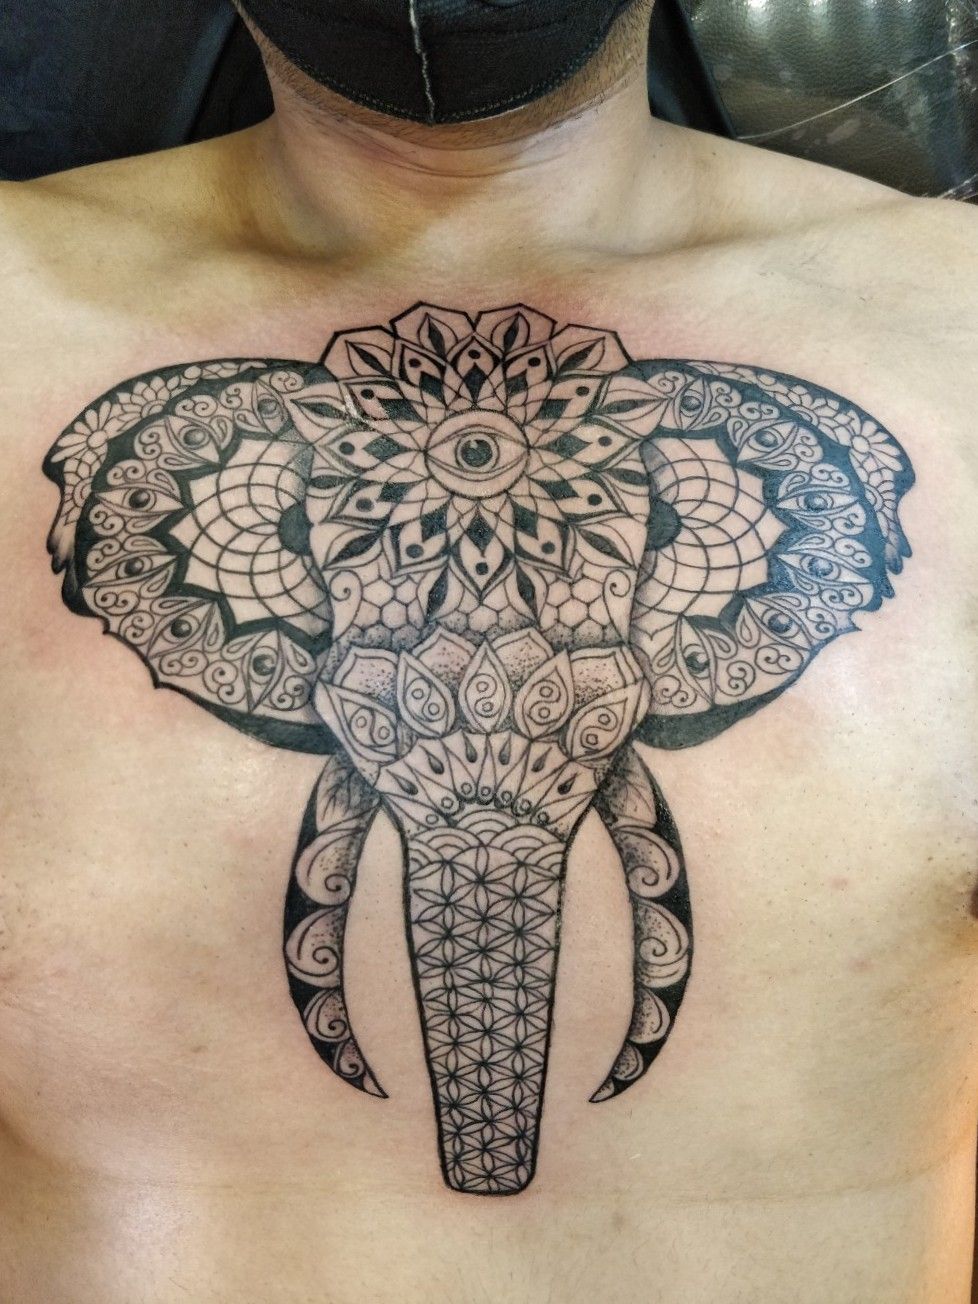 Captivating Mandala Elephant Tattoos: 20 Meaningful Designs for Ink  Enthusiasts and Art Lovers | Mandala elephant tattoo, Elephant tattoos,  Elephant head tattoo